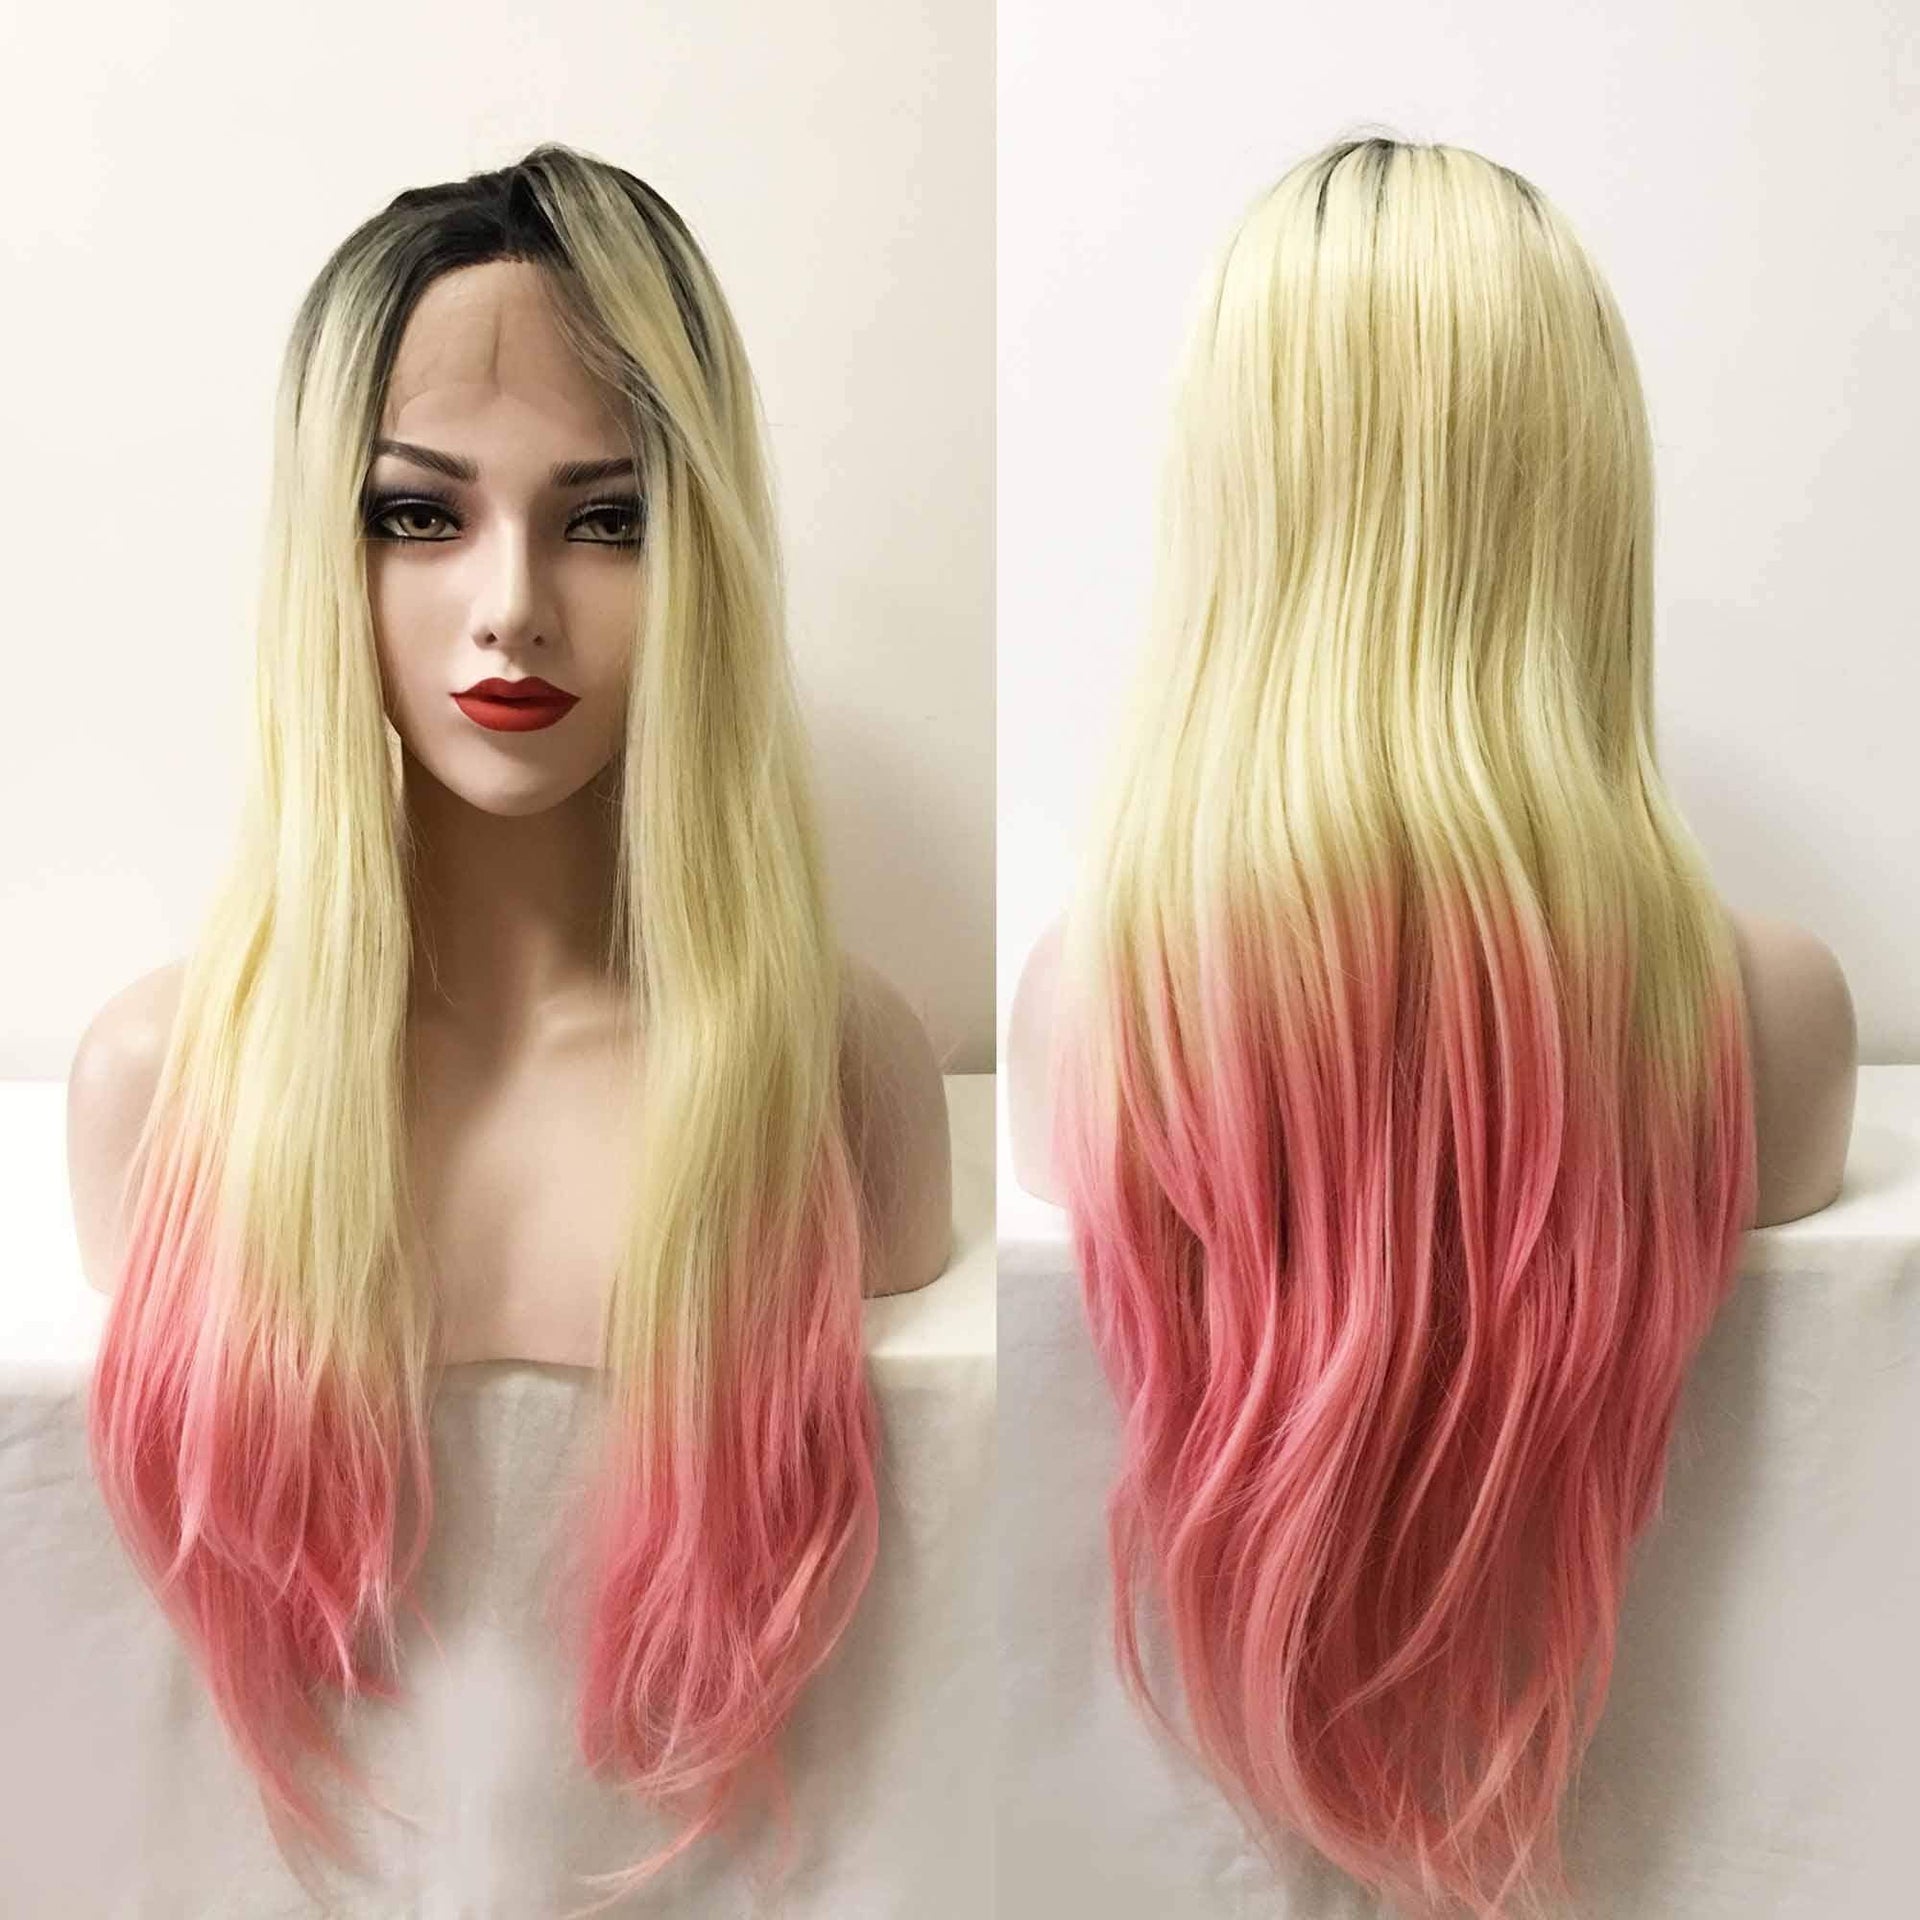 nevermindyrhead Women Blonde Ombre Pink Dark Root Lace Front Long Straight Middle Part Wig